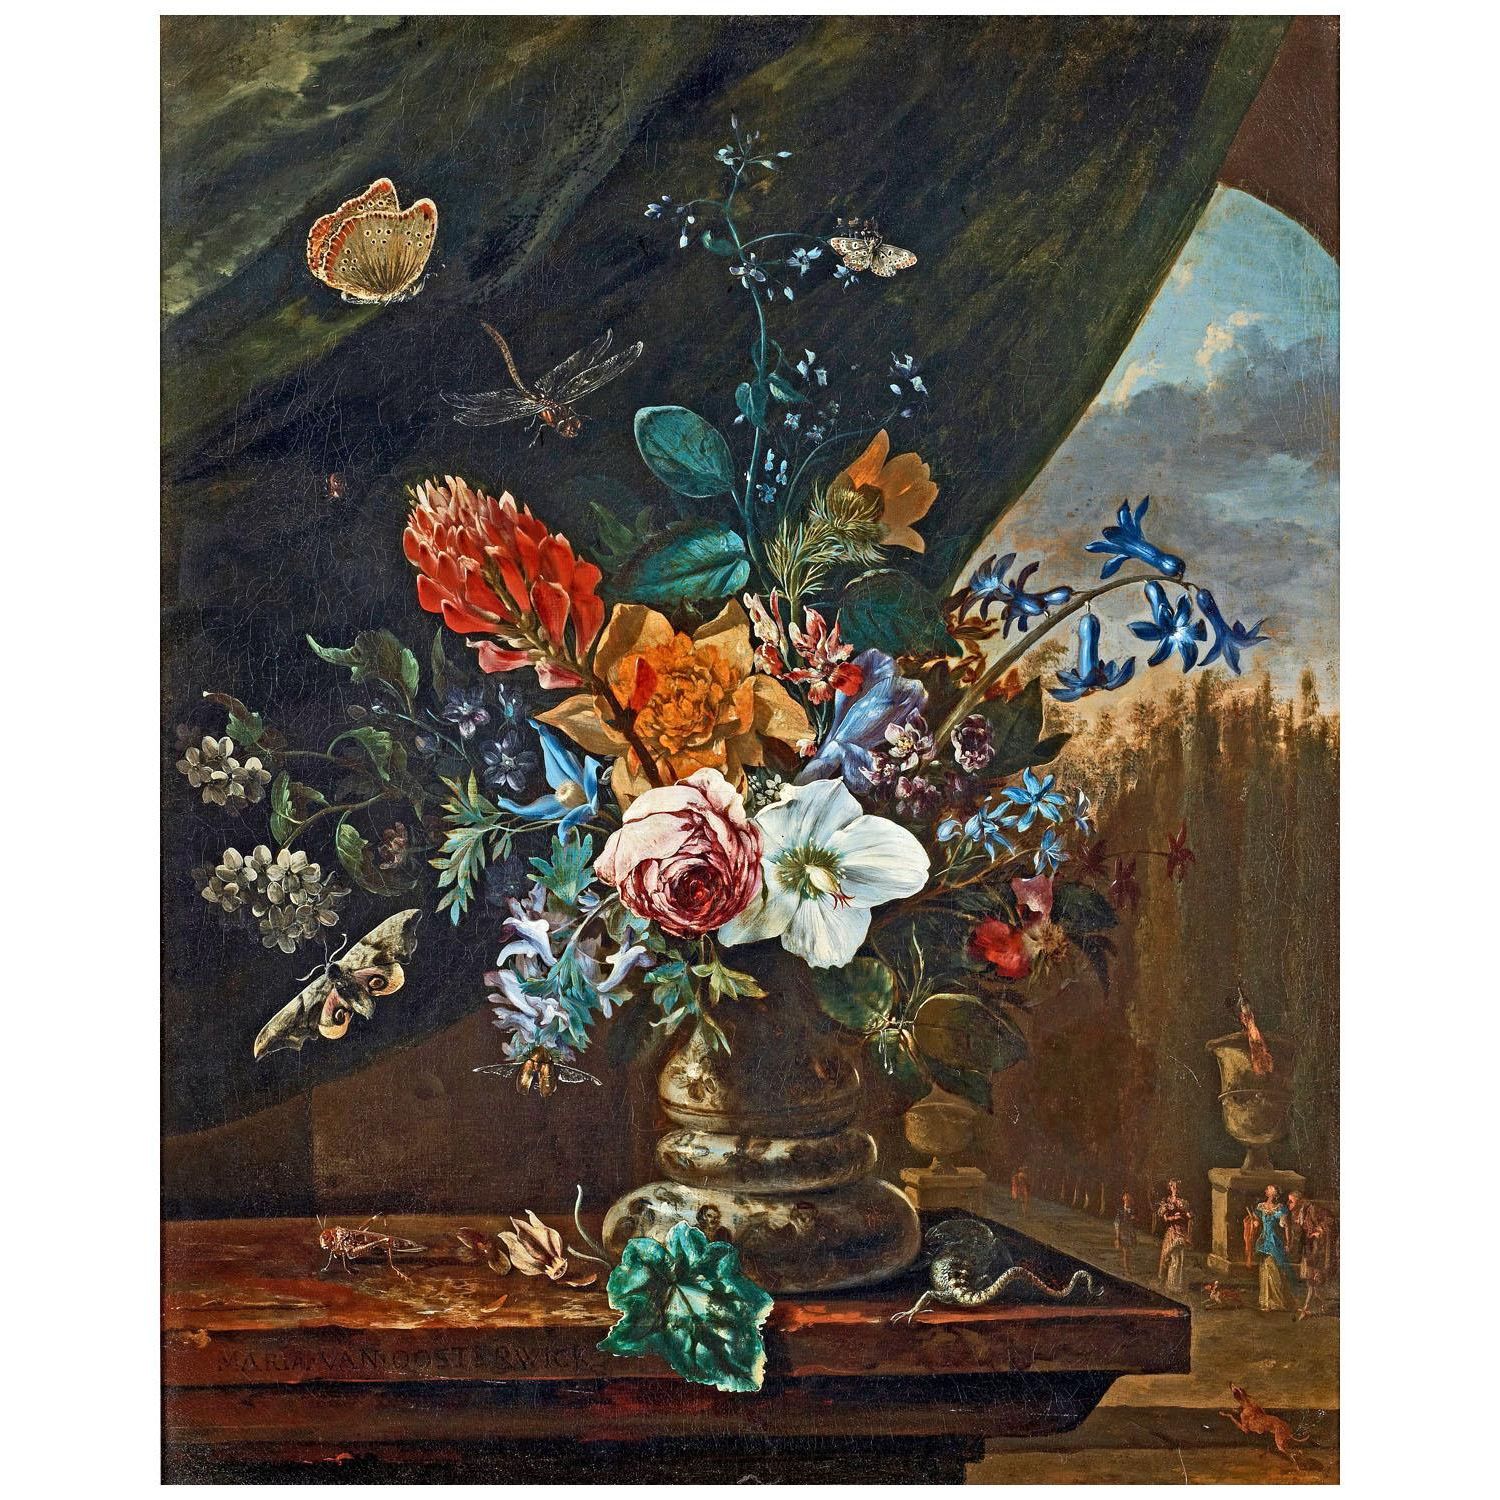 Maria van Oosterwijck. A Floral Still Life. 1680. Private collection